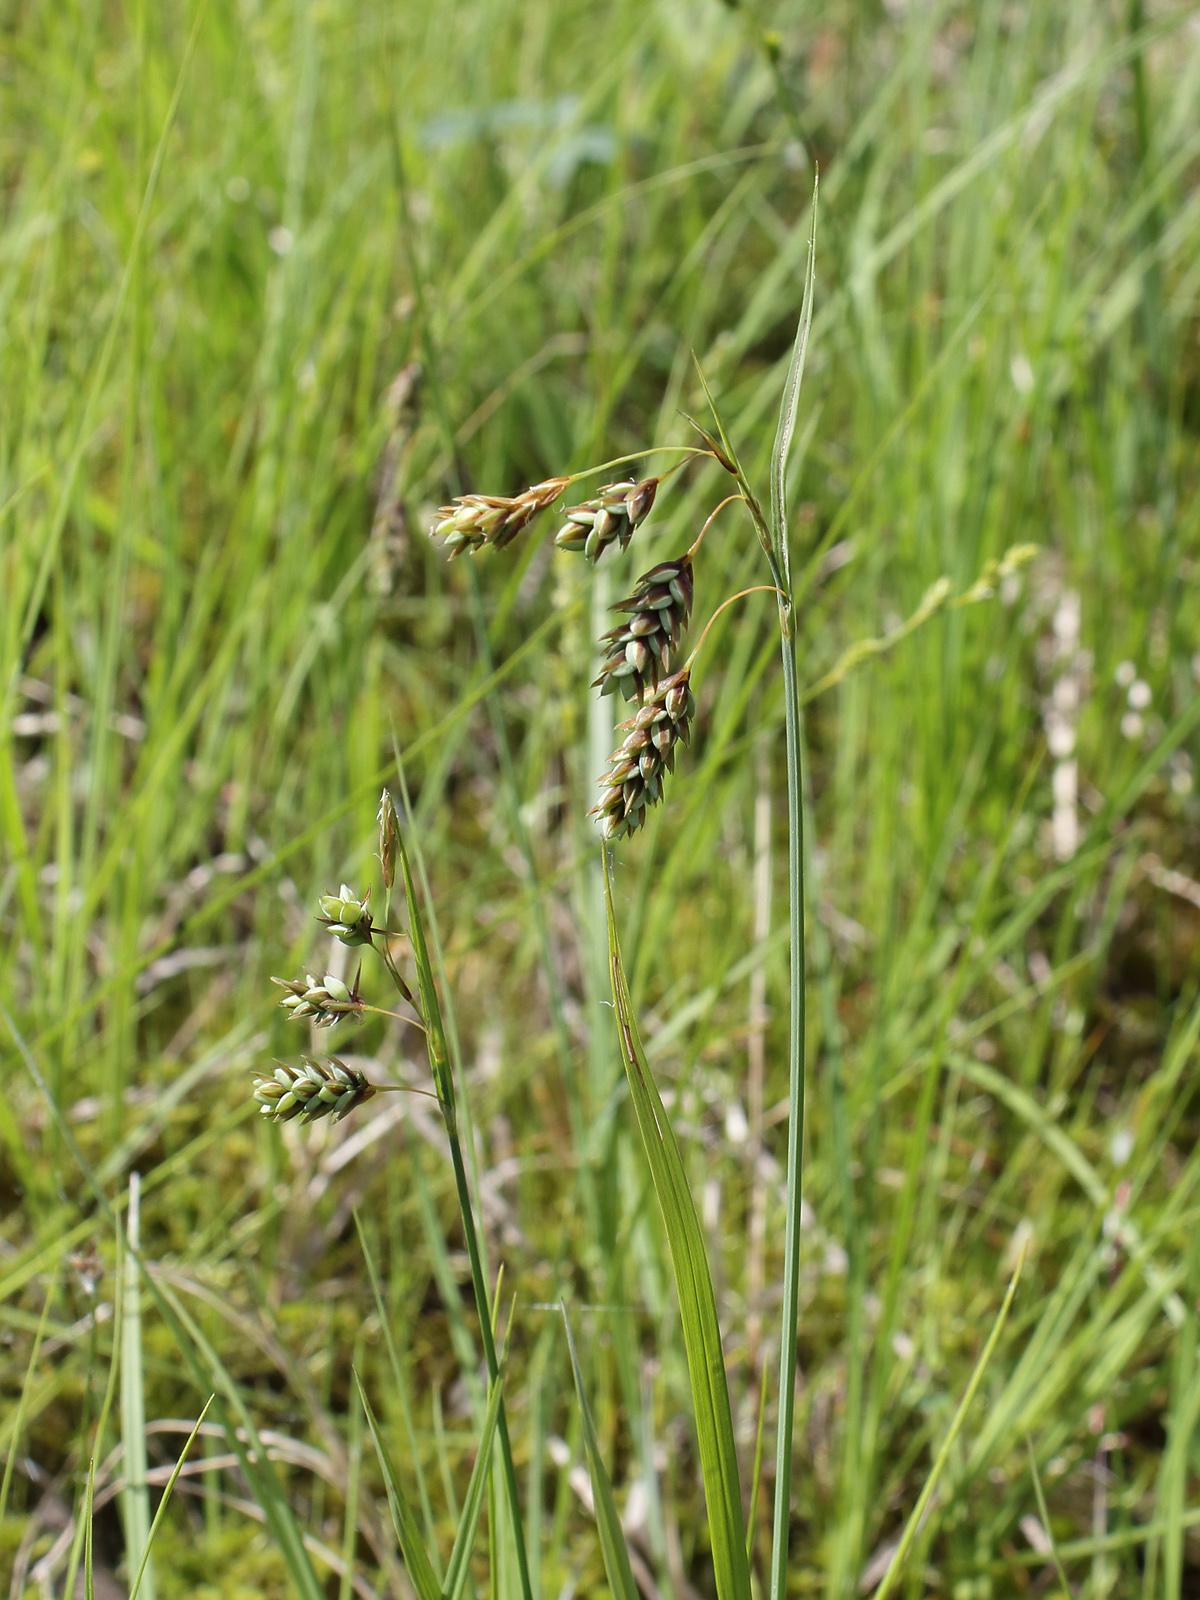 green-brown spikelets with green foliage and stems